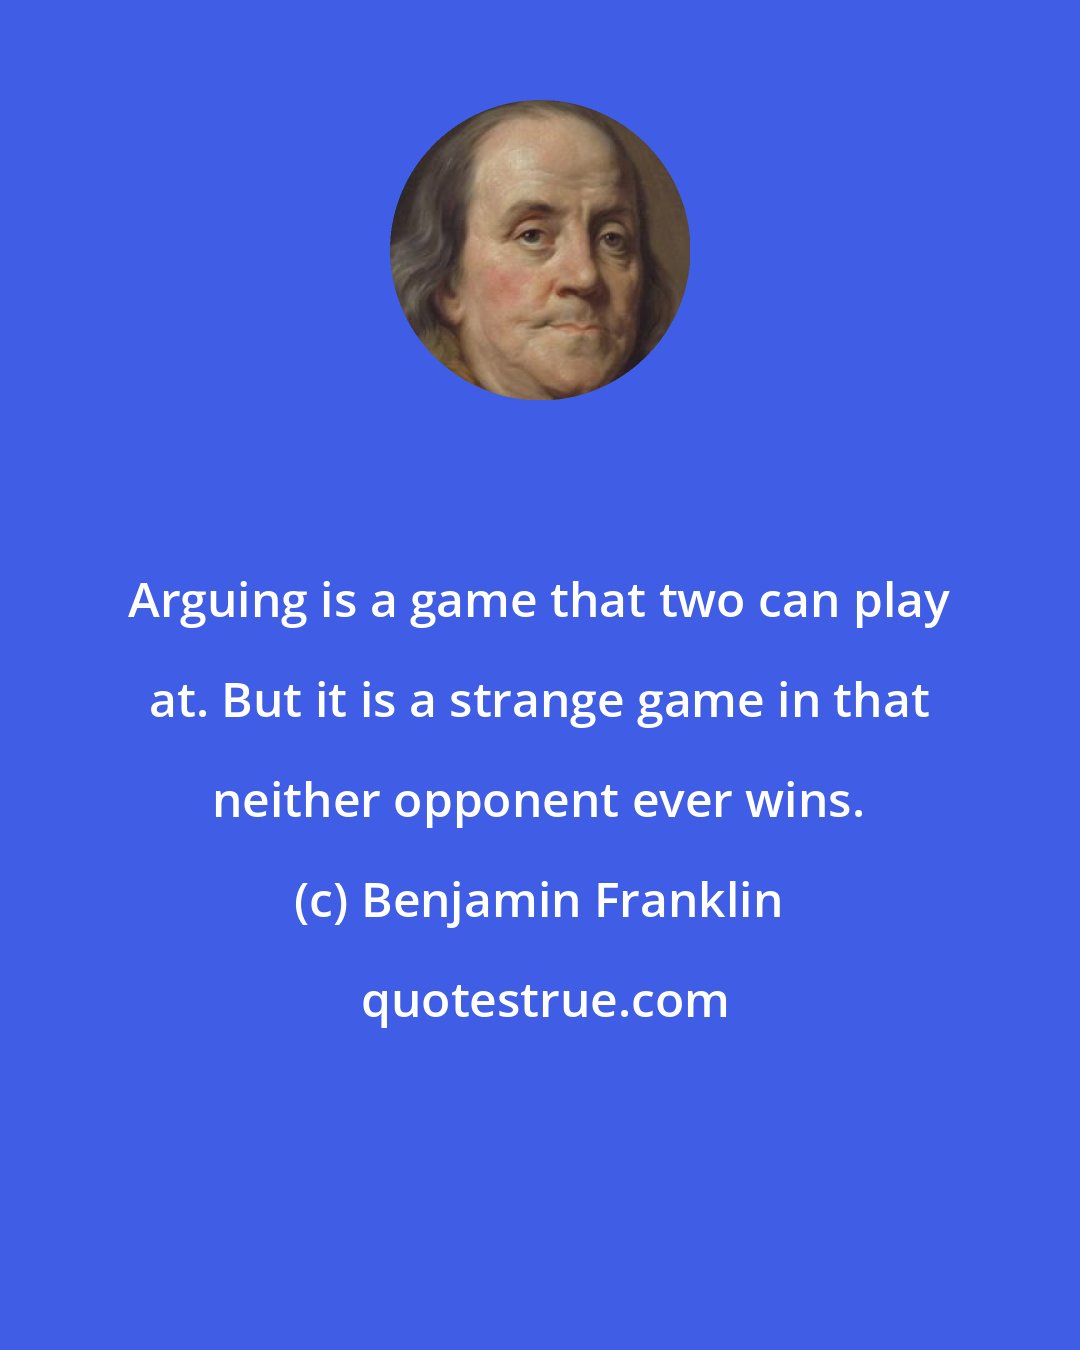 Benjamin Franklin: Arguing is a game that two can play at. But it is a strange game in that neither opponent ever wins.